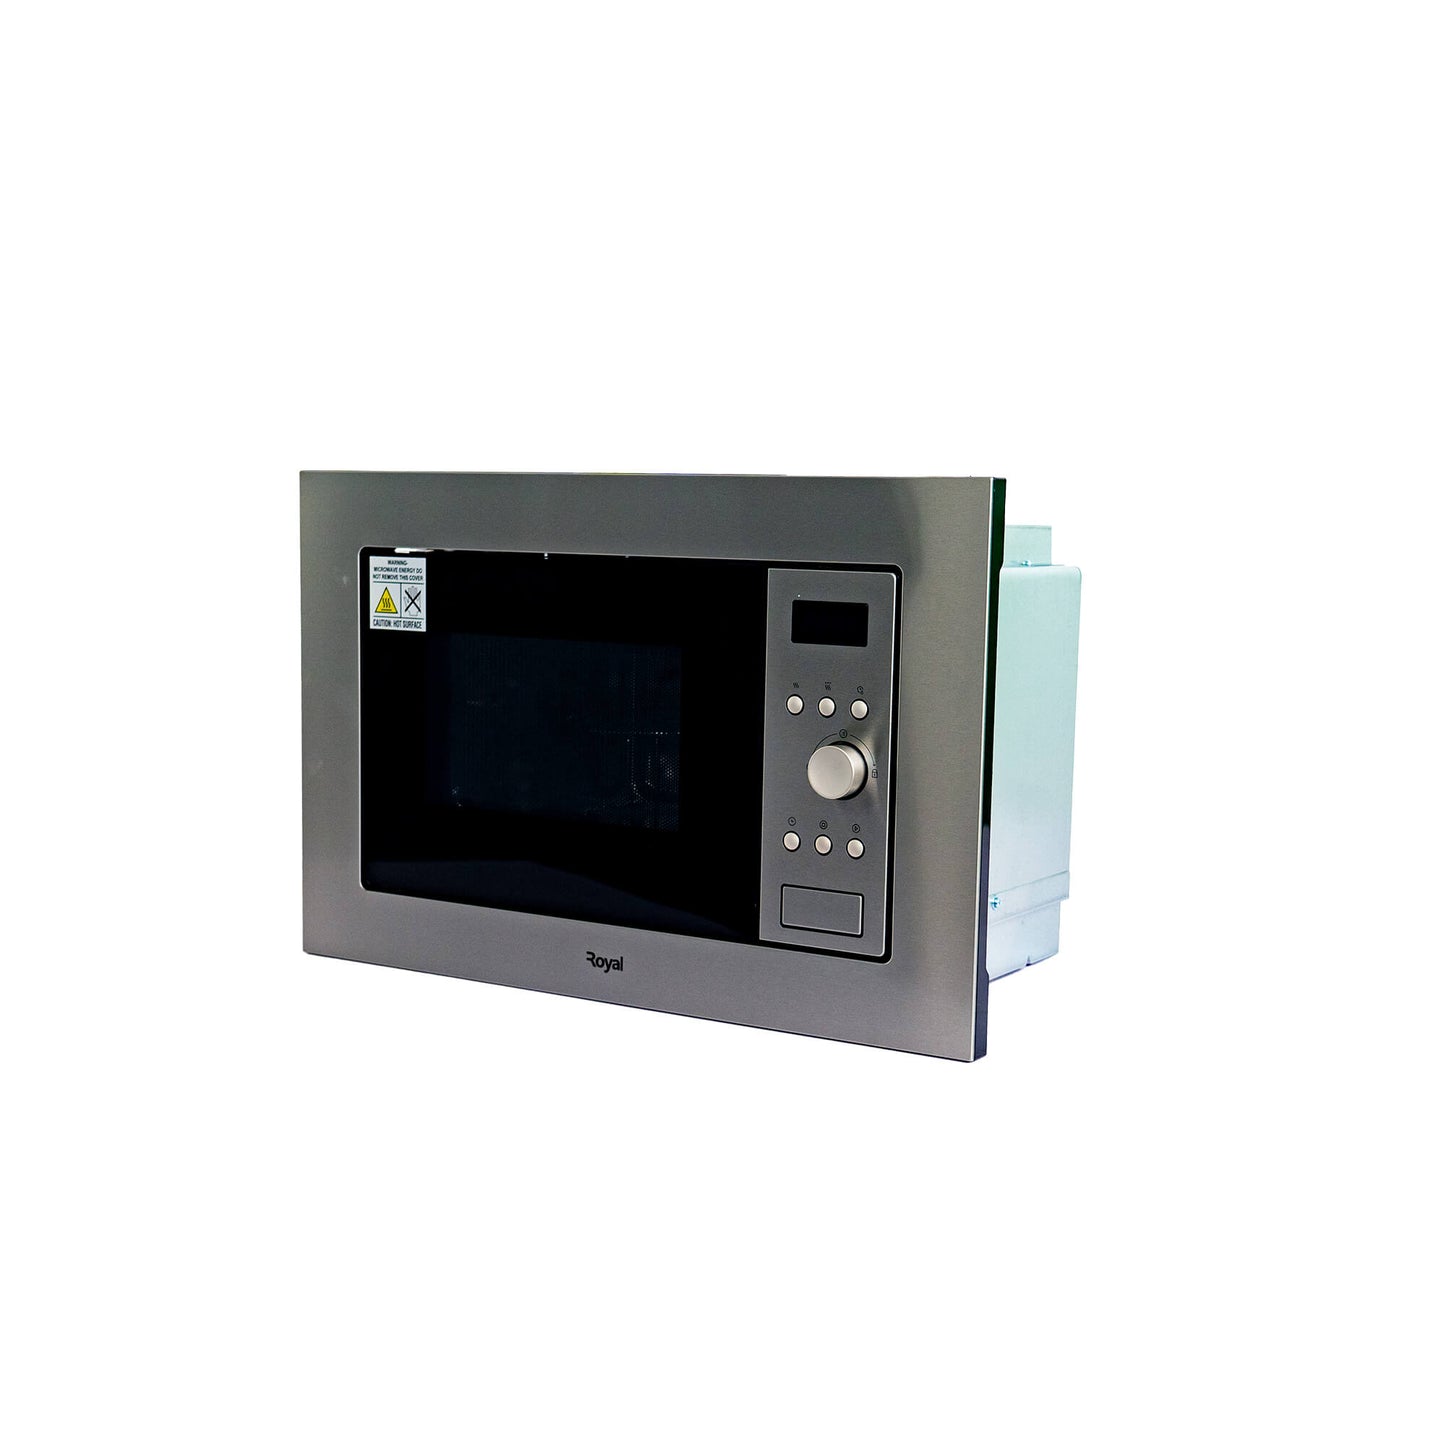 Royal 20-Litre Built-In Microwave Oven RBIMW20S